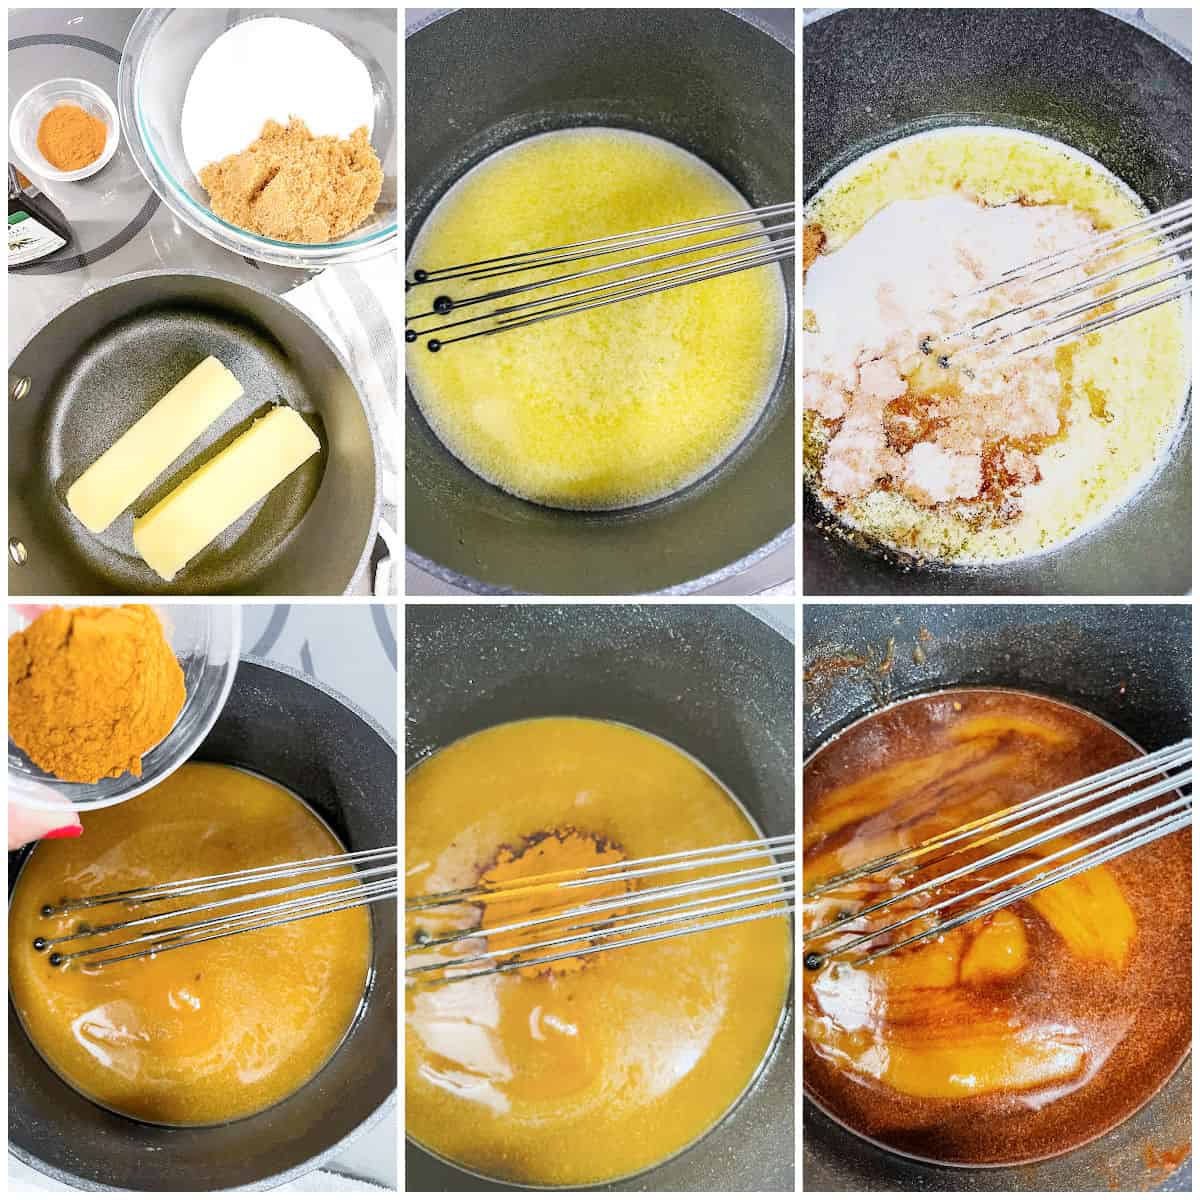 Apple Dumpling butter, sugar and cinnamon mixture step by step photo collage.